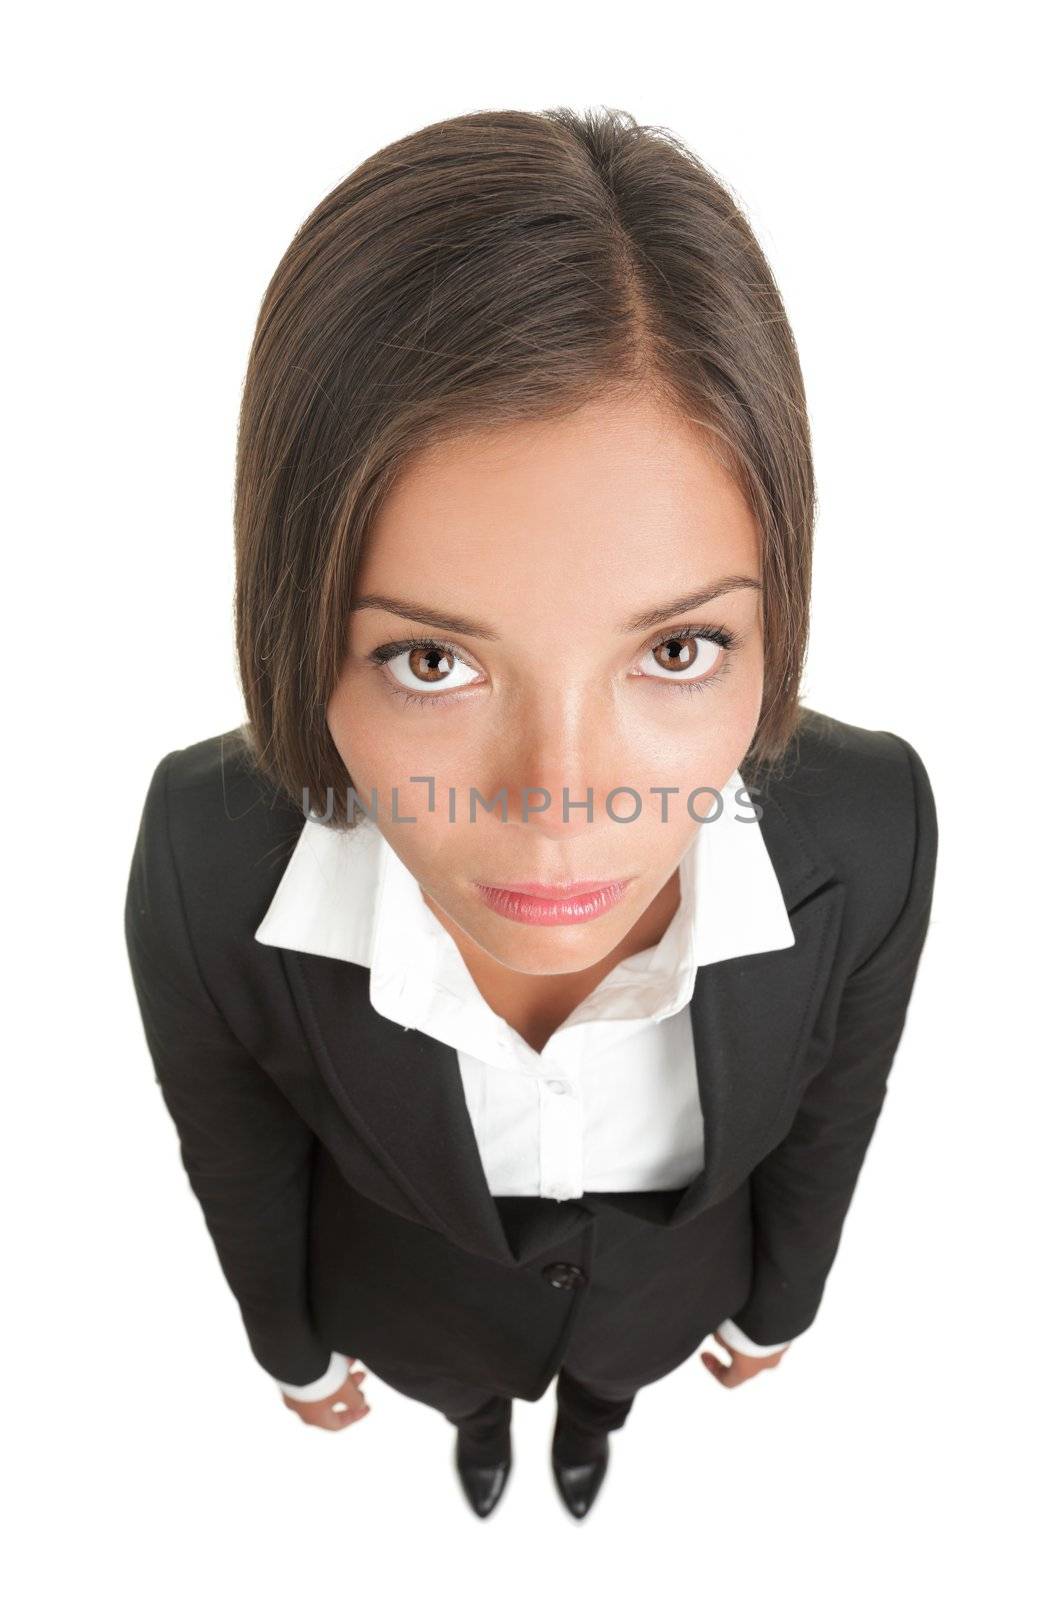 Bored sad businesswoman isolated. Funny image of a young woman with a dull look staring at the camera. High angle view with near fish-eye effect. Isolated on white background.